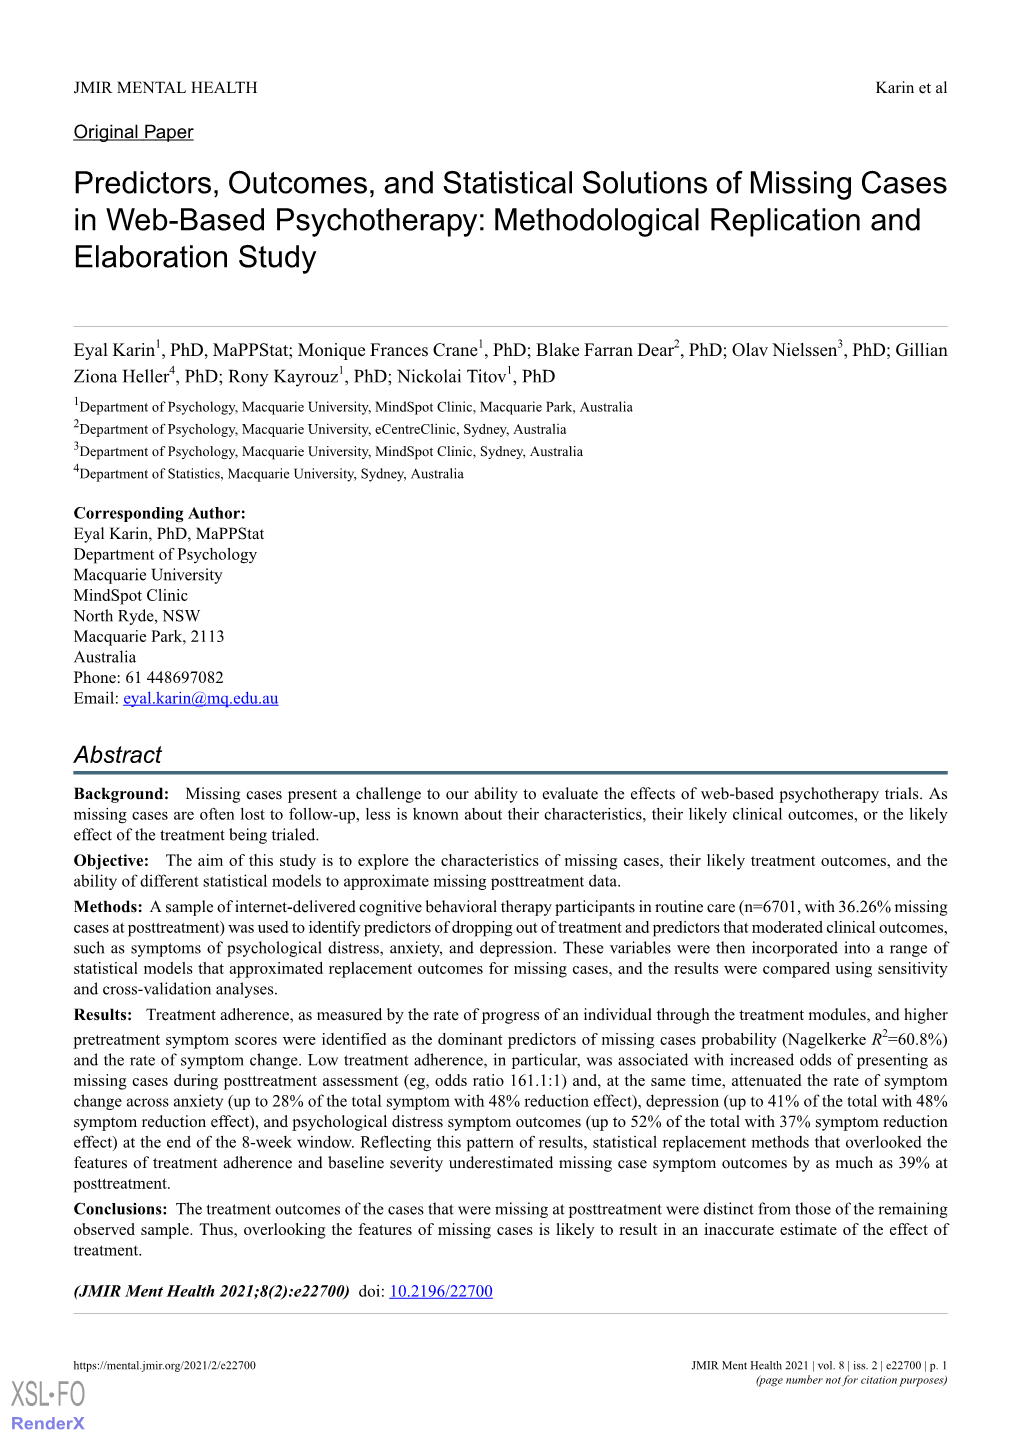 Predictors, Outcomes, and Statistical Solutions of Missing Cases in Web-Based Psychotherapy: Methodological Replication and Elaboration Study